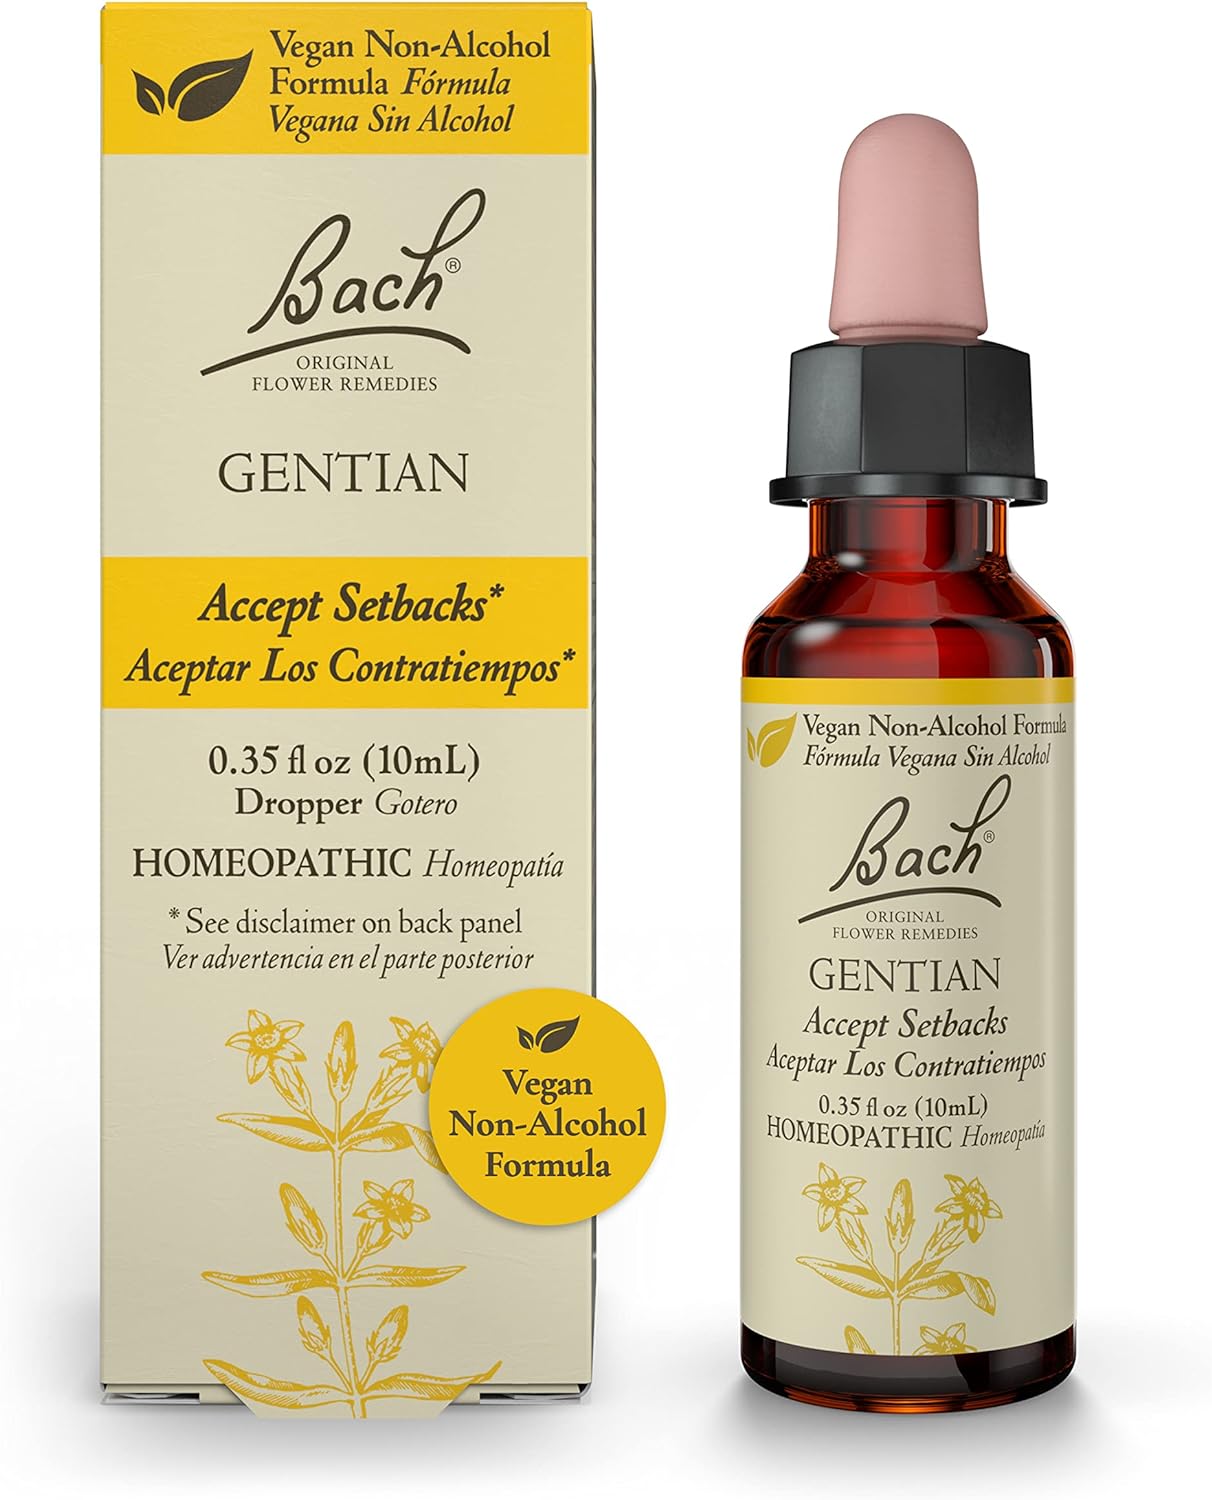 Bach Original Flower Remedies, Gentian for Accepting Setbacks (Non-Alcohol Formula), Natural Homeopathic Flower Essence, Holistic Wellness and Stress Relief, Vegan, 10mL Dropper